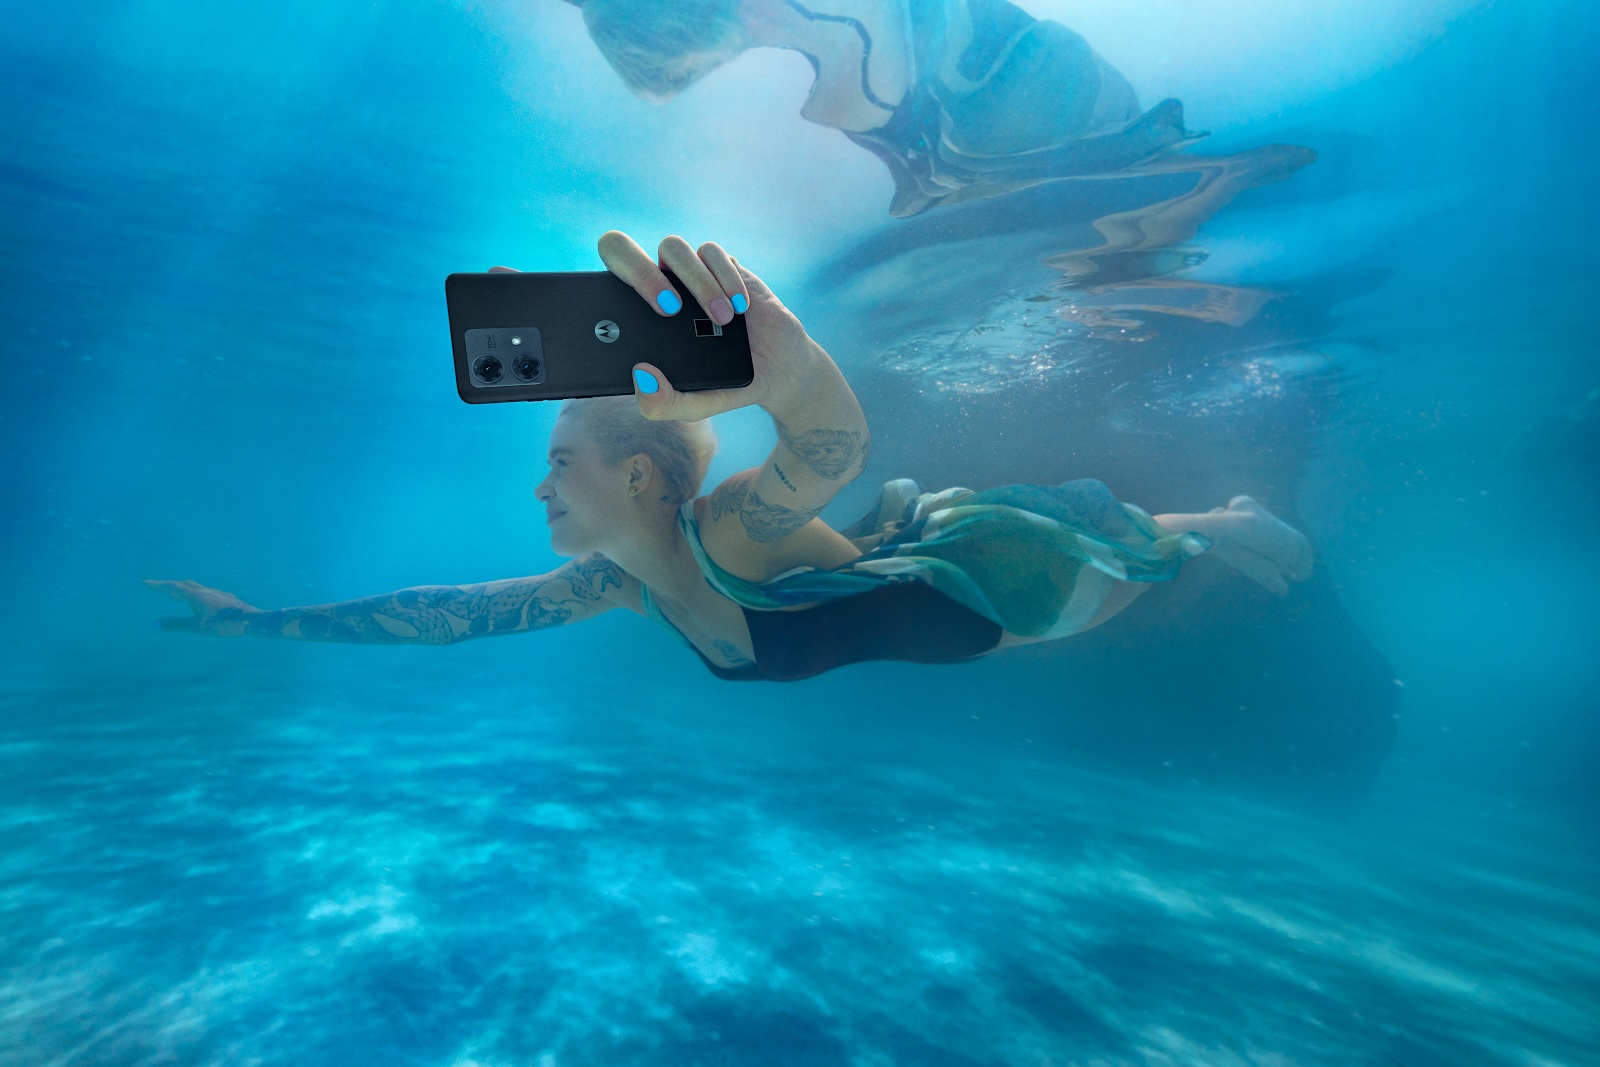 The Motorola Edge 40 Neo slims and swims for less